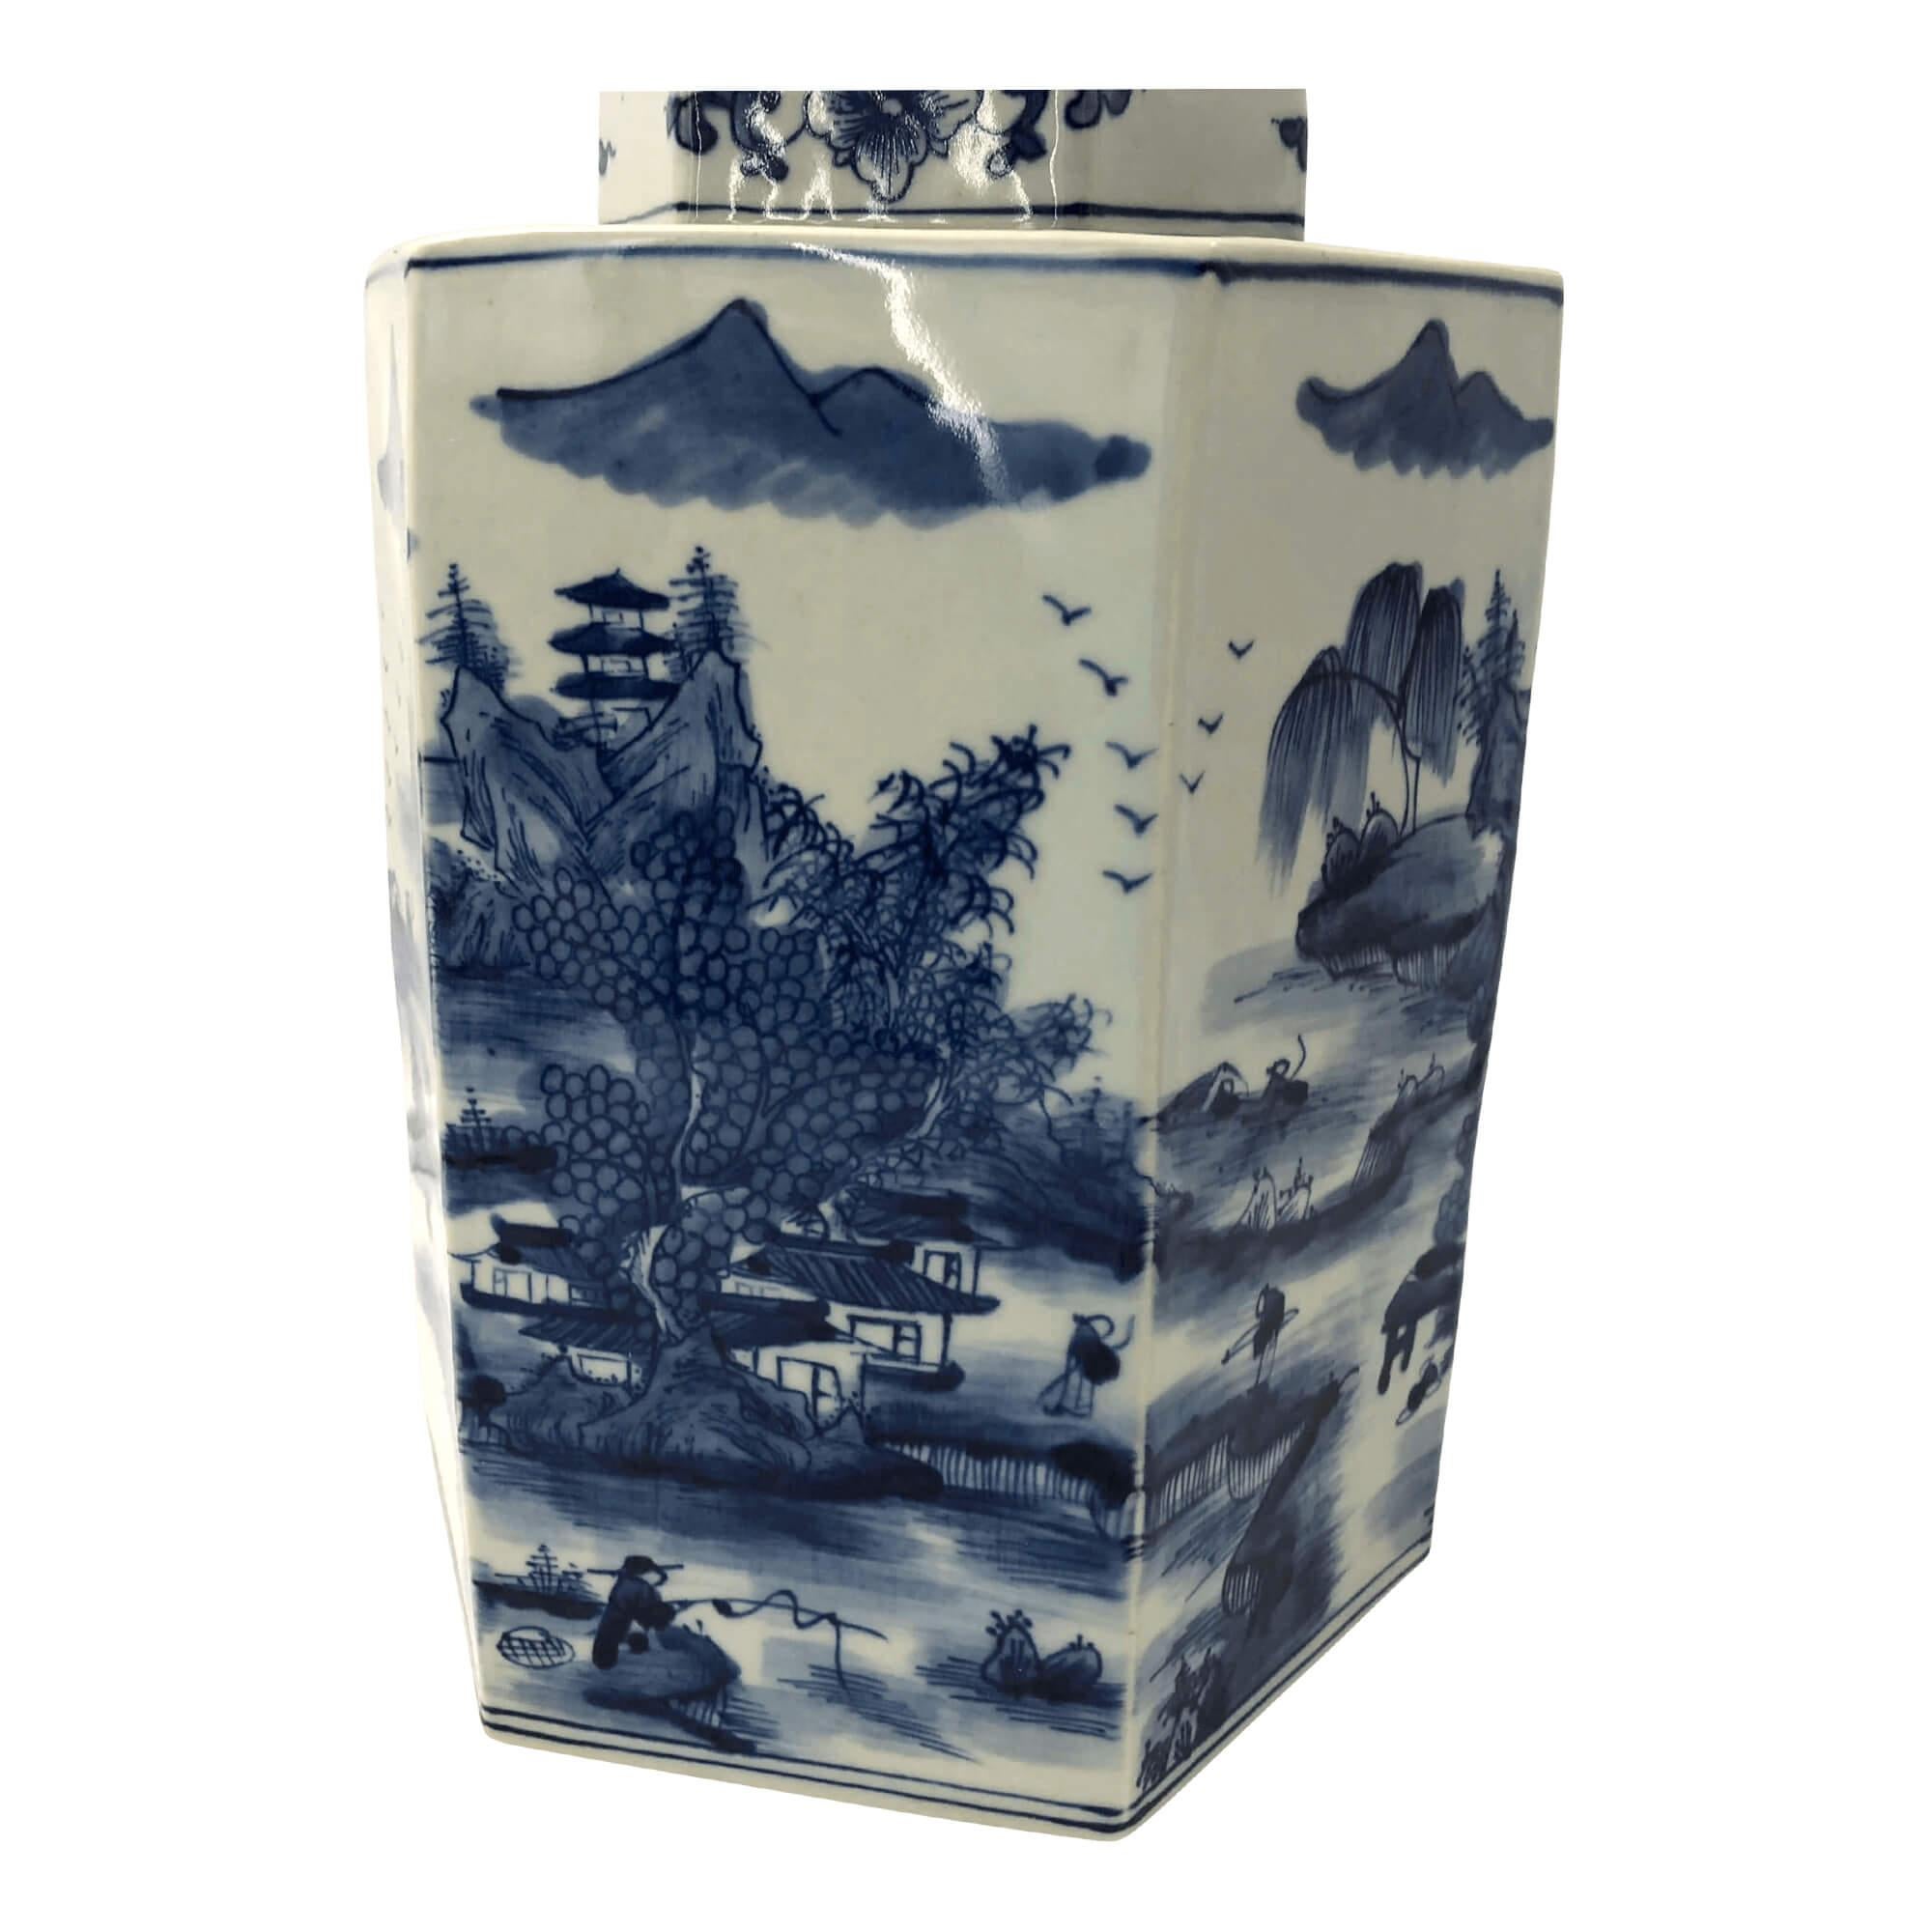 Chinese blue and white hand-painted ceramic octagonal tea canisters with lids.

Dimensions: 8.75